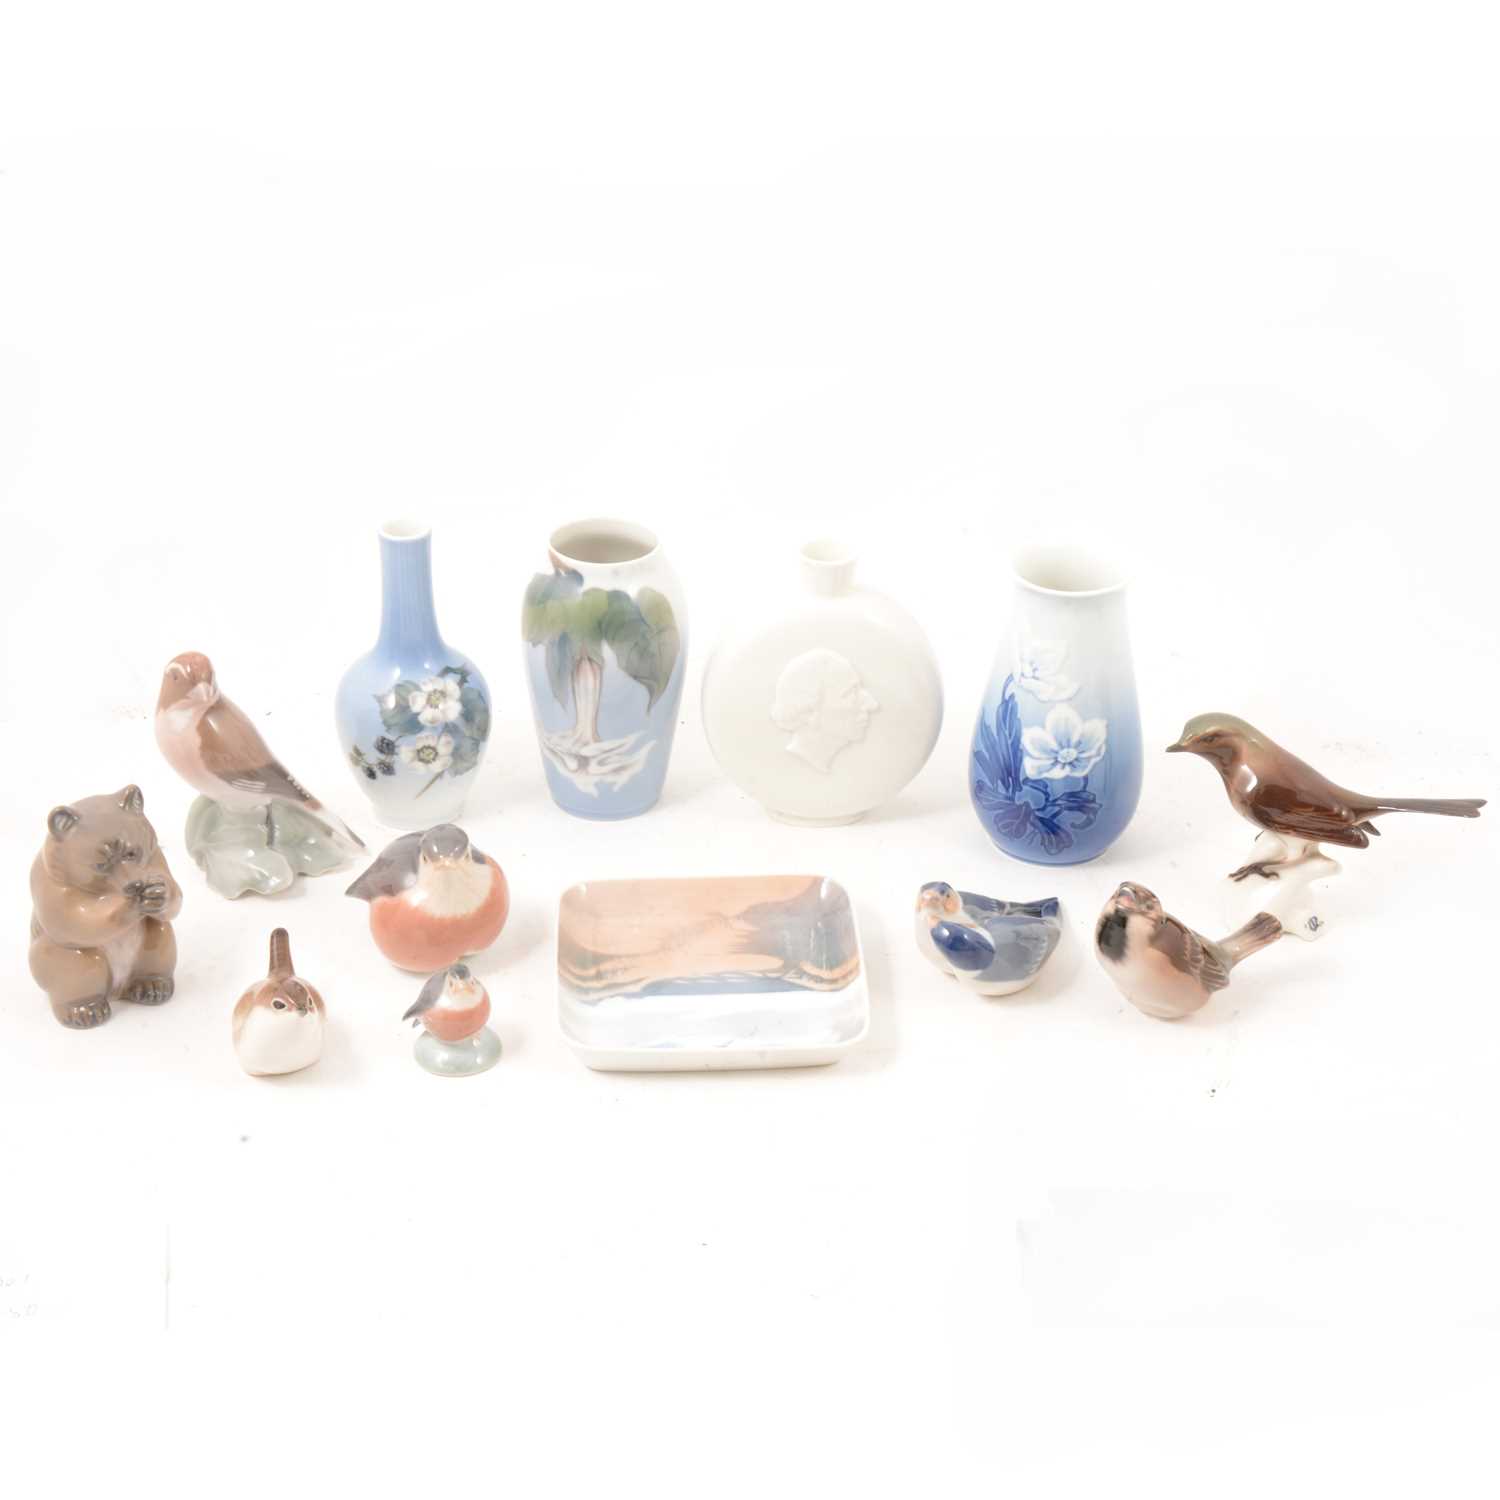 Lot 19 - Royal Copenhagen and other Continental vases and animal figures.